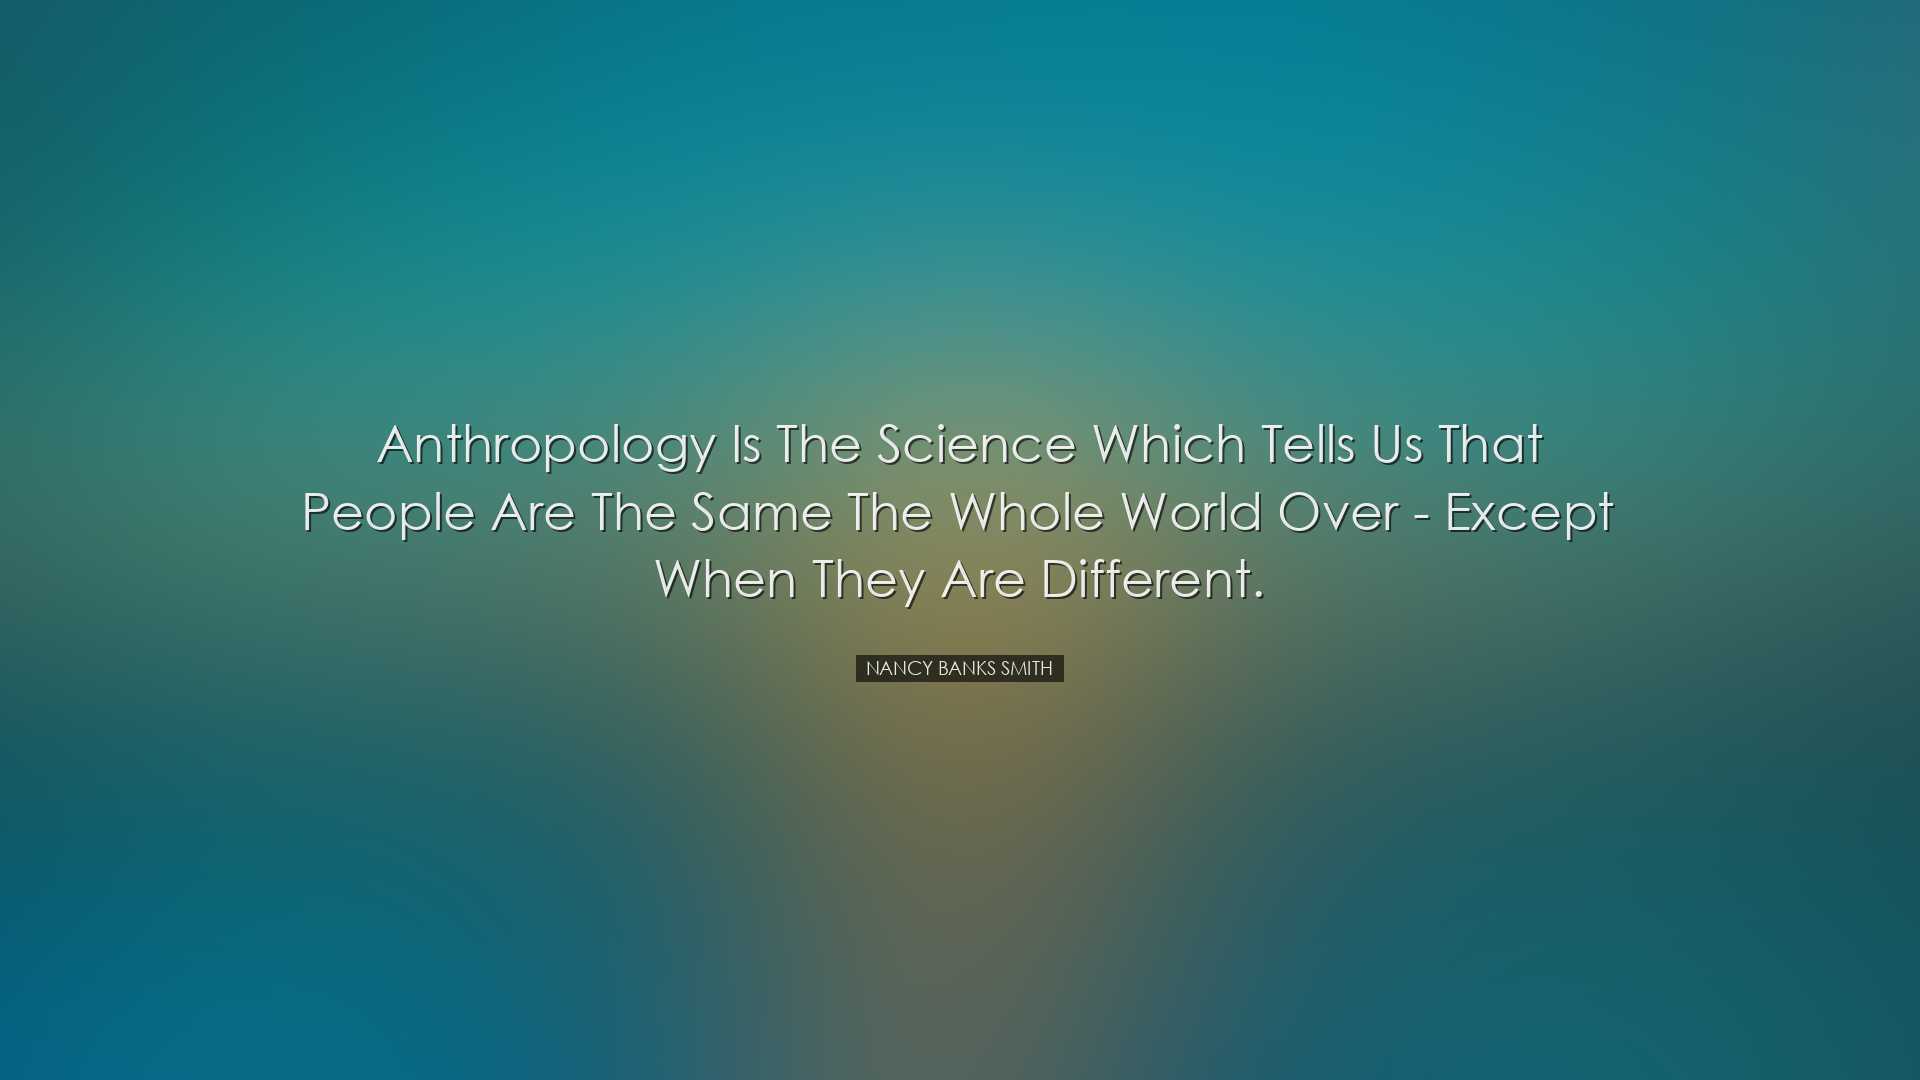 Anthropology is the science which tells us that people are the sam